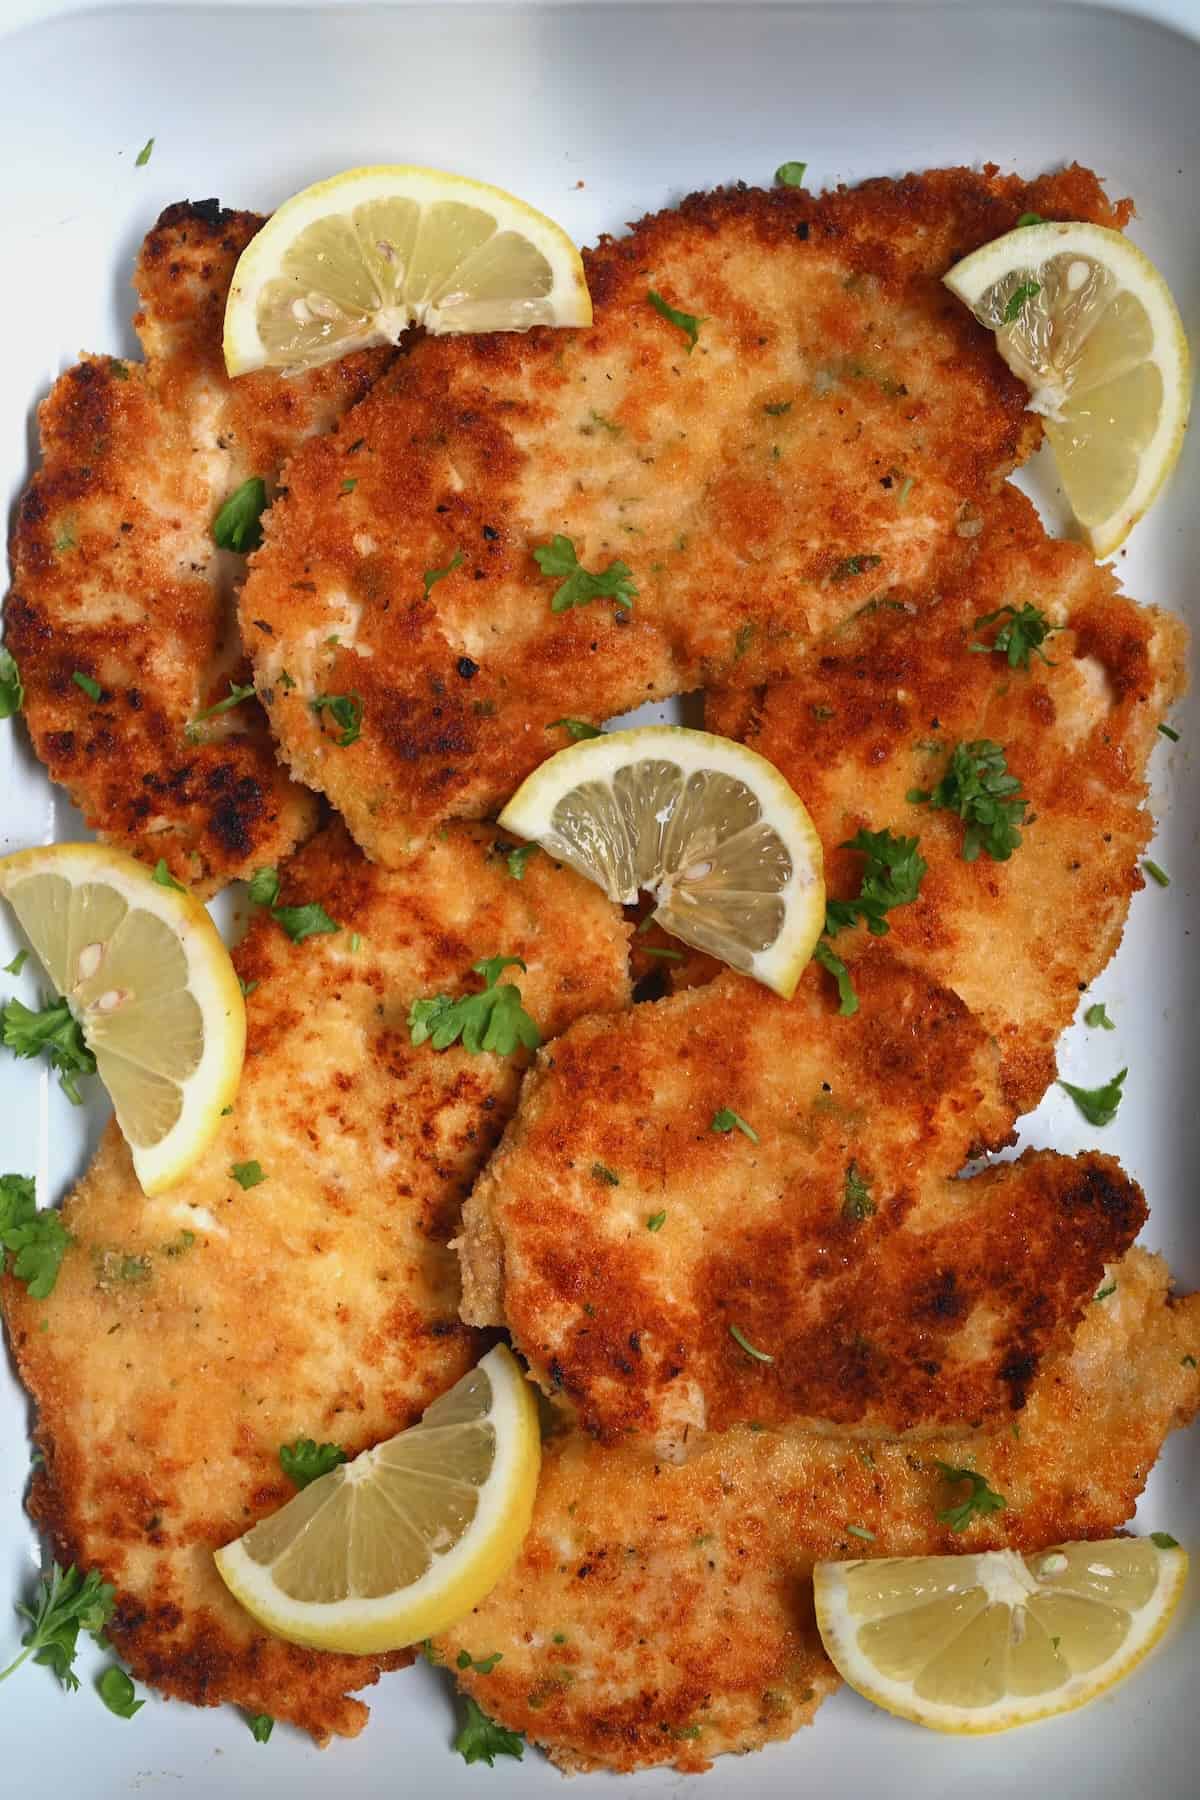 Cooked chicken cutlets in a serving dish